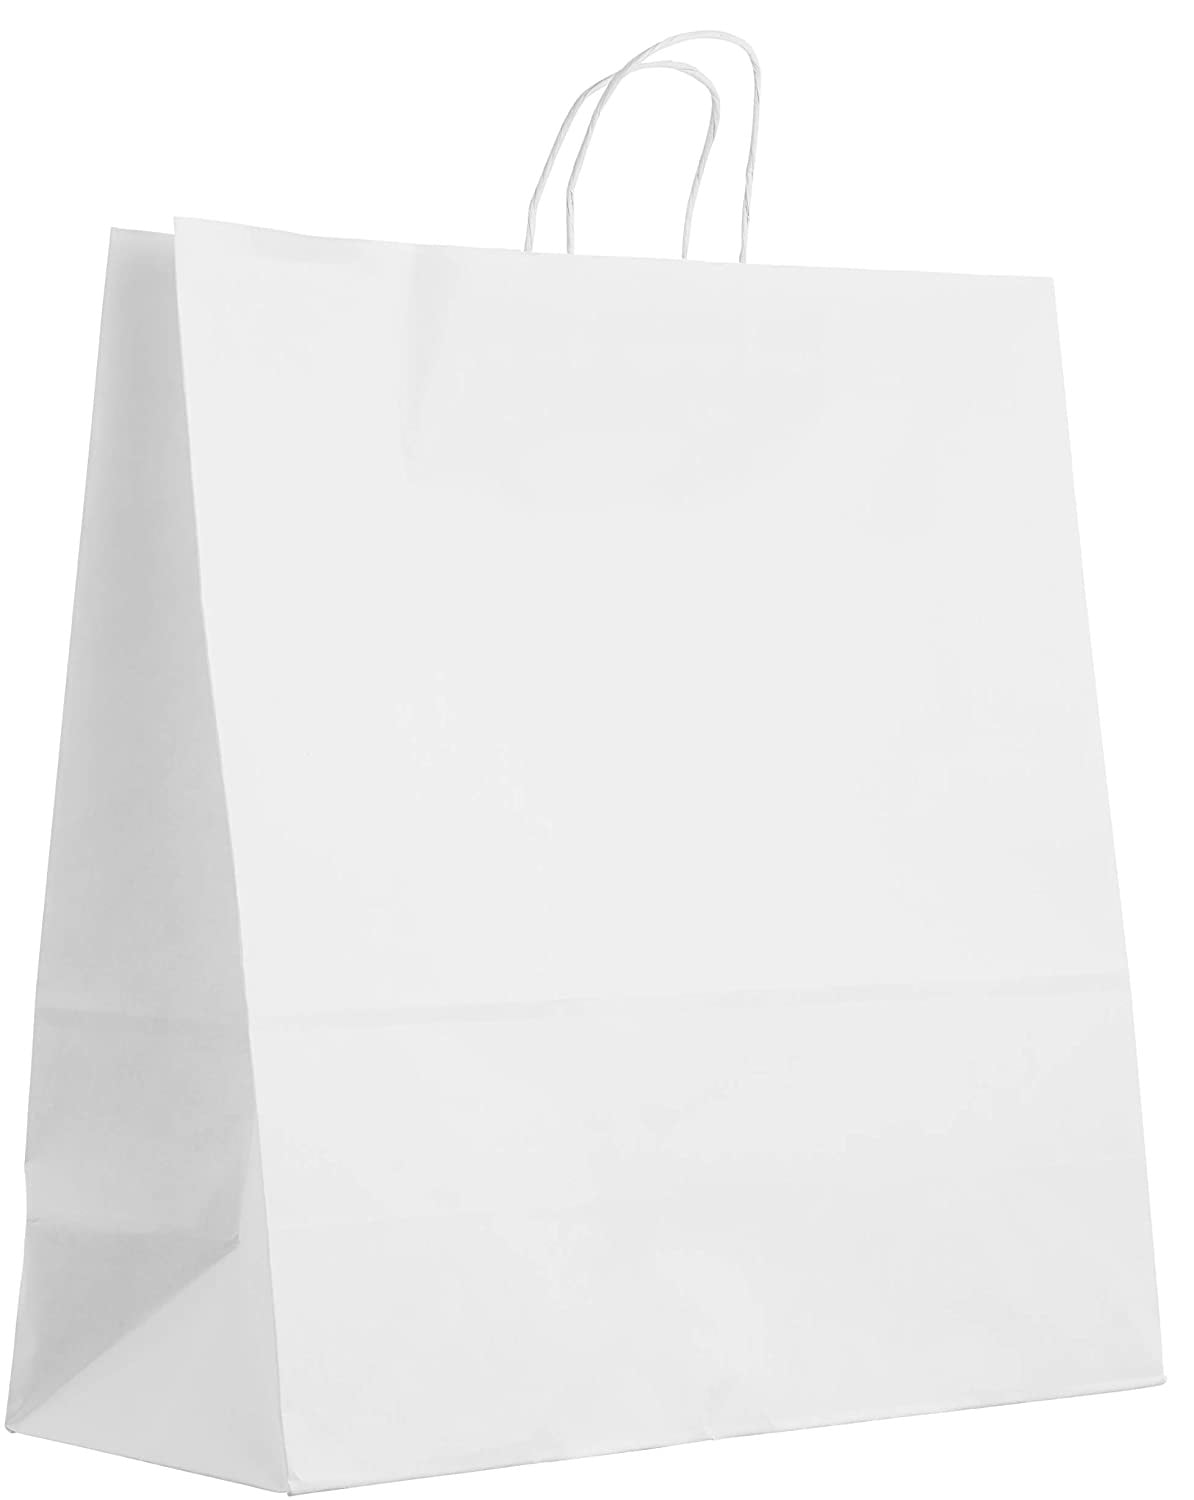 10x5x15 Inches Medium White Kraft Paper Bags with Handles Details about   200 Pack 